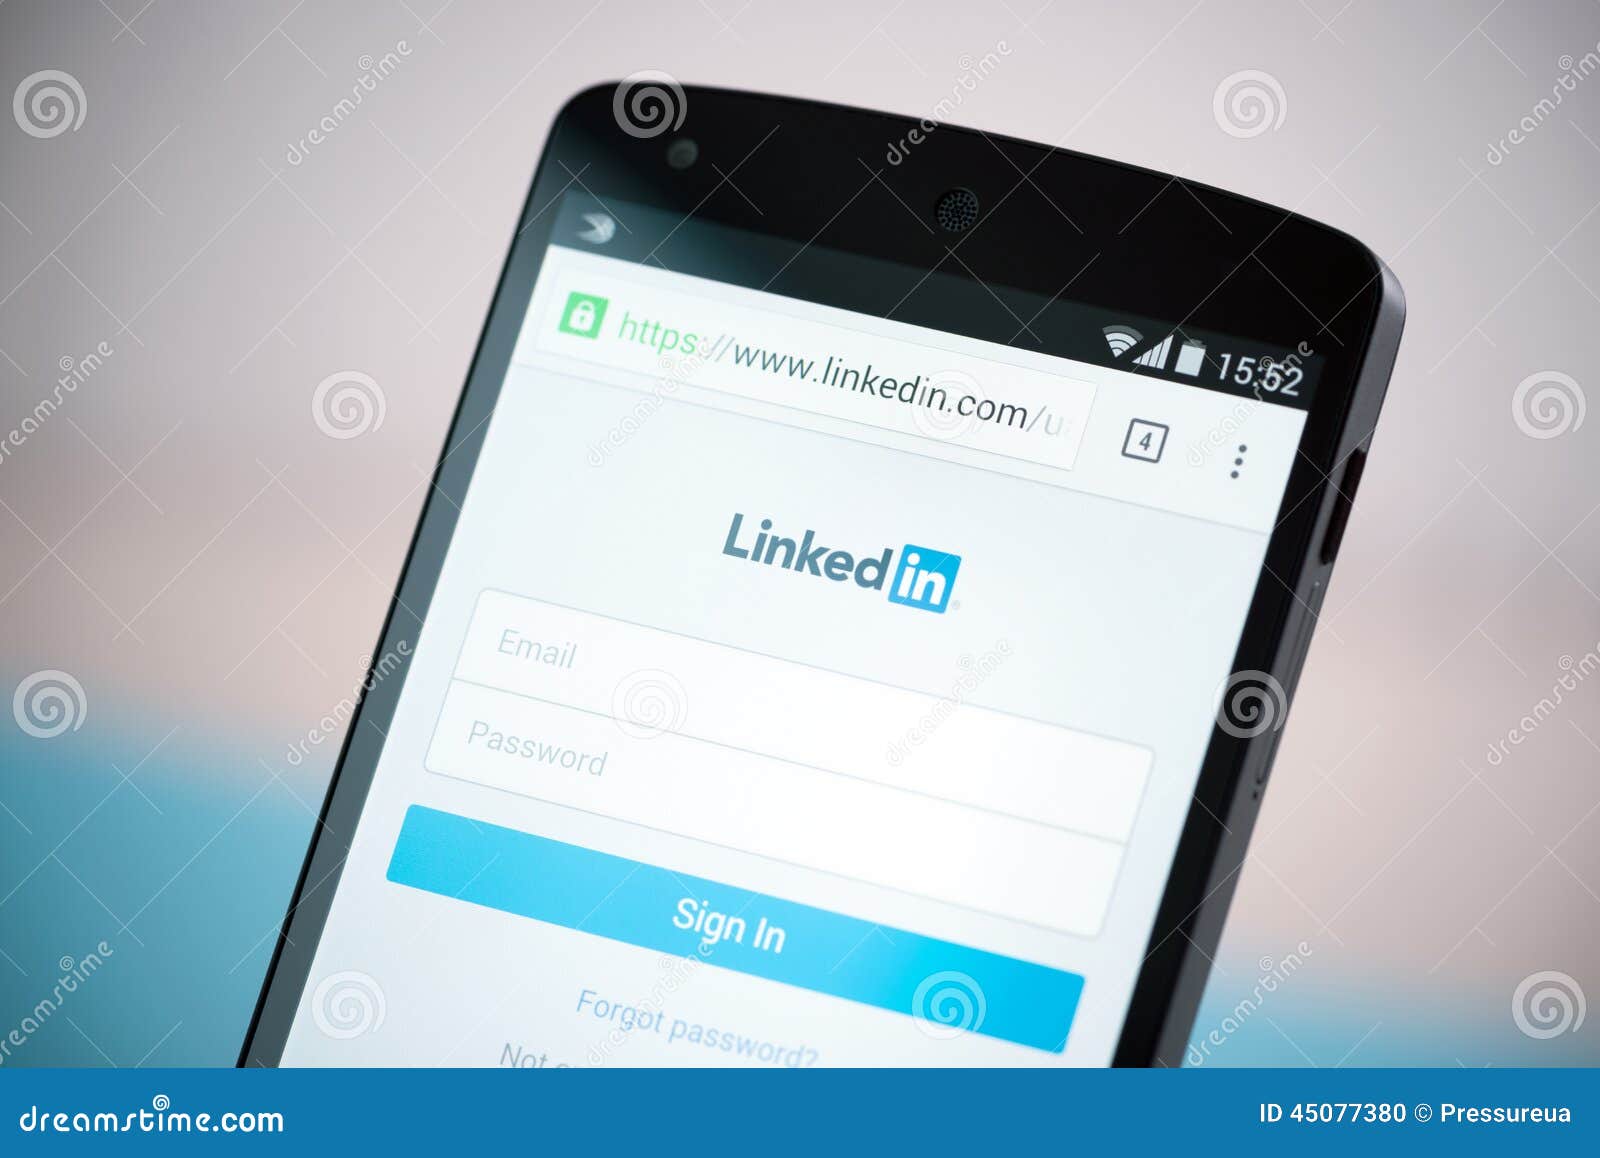 Linkedin Login Page on Apple IPad Screen Editorial Image - Image of device,  apps: 28829720